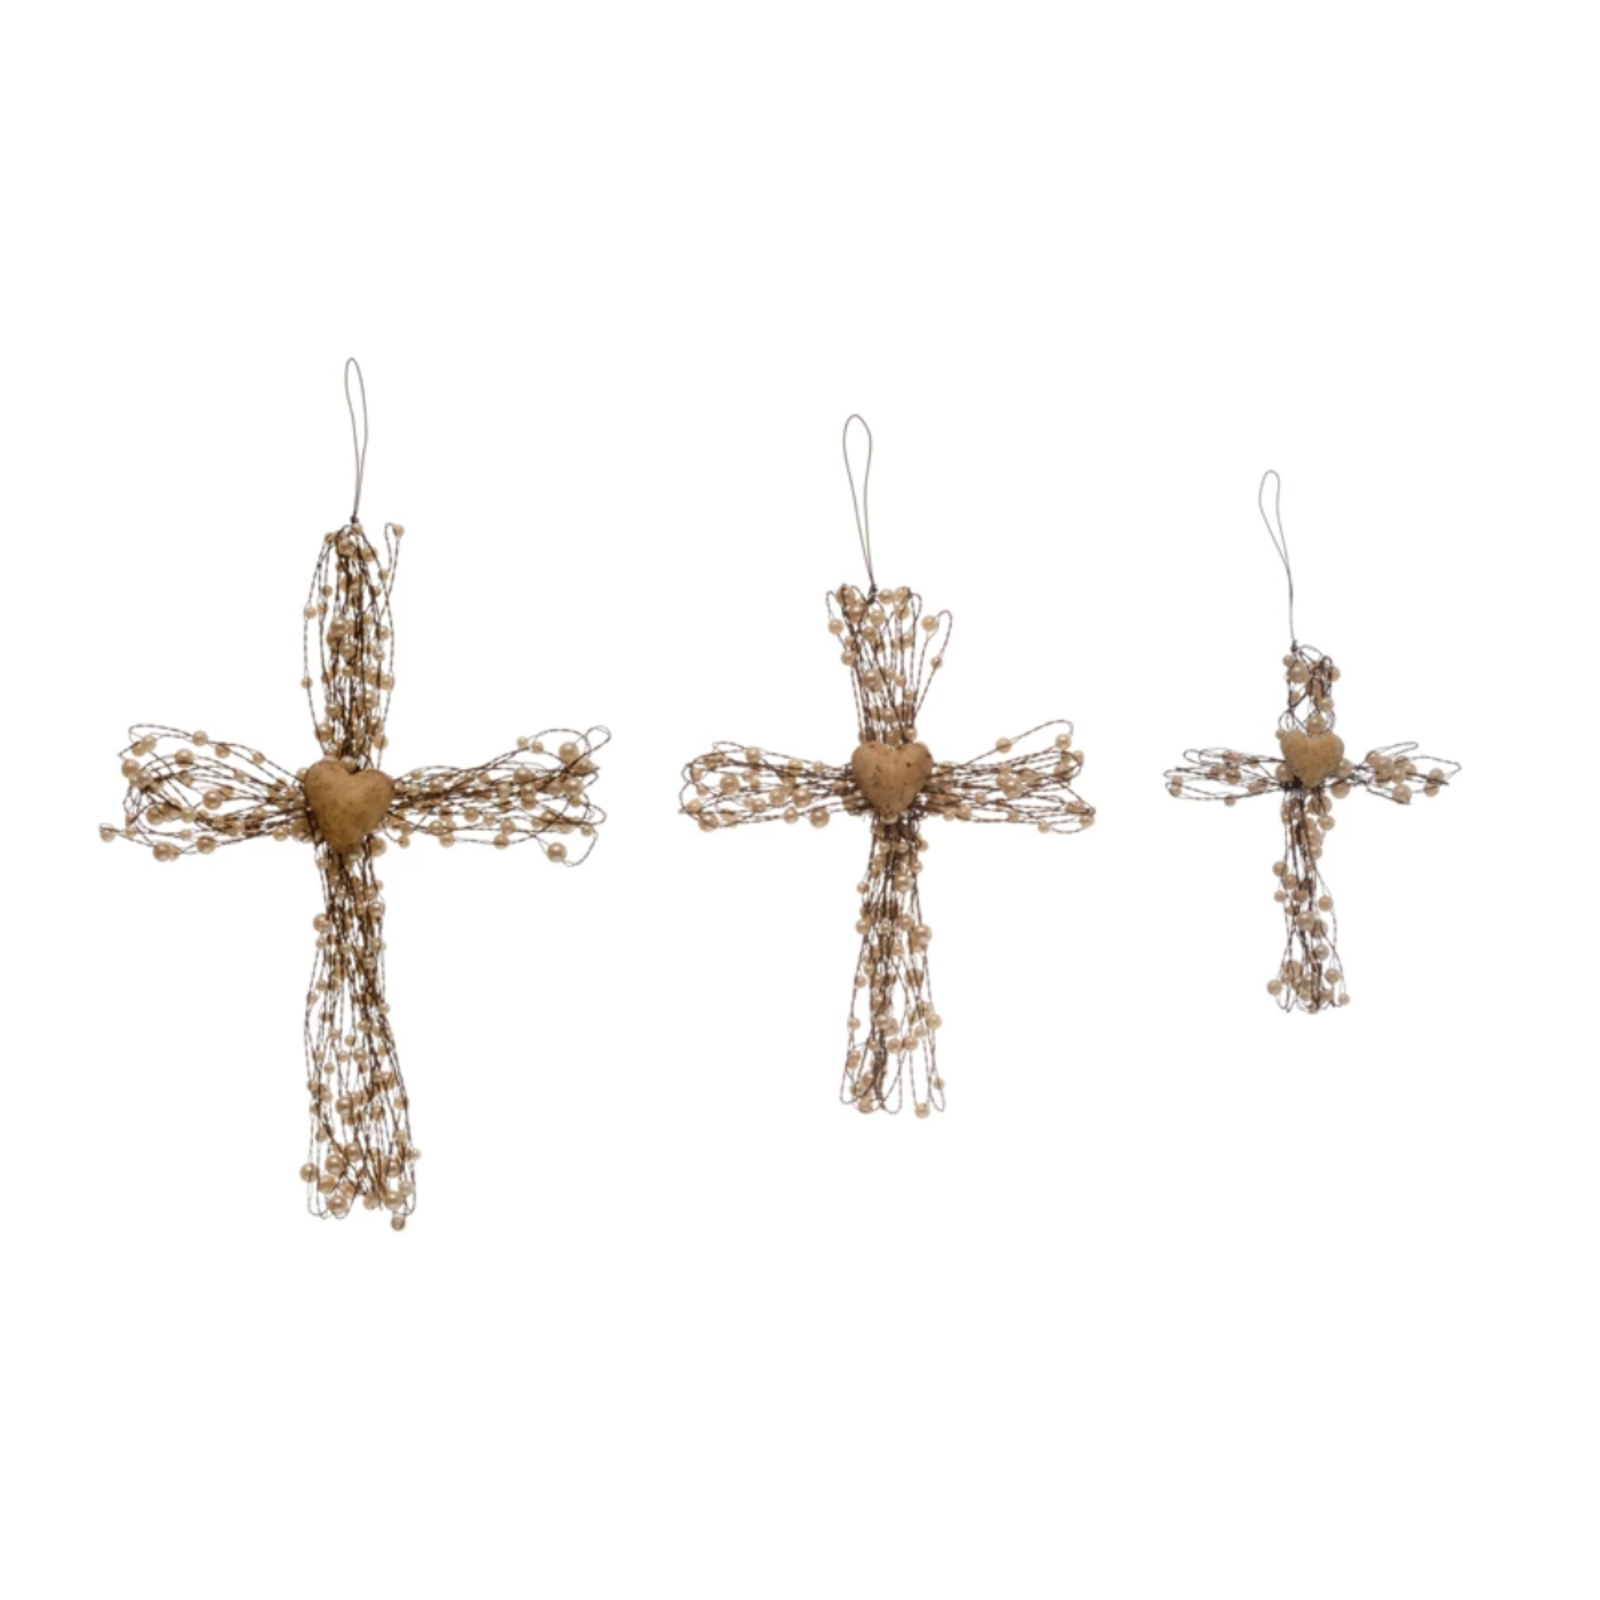 Creative Co-Op Beaded Wire Cross Ornaments with Heart Large   XM6126L loading=